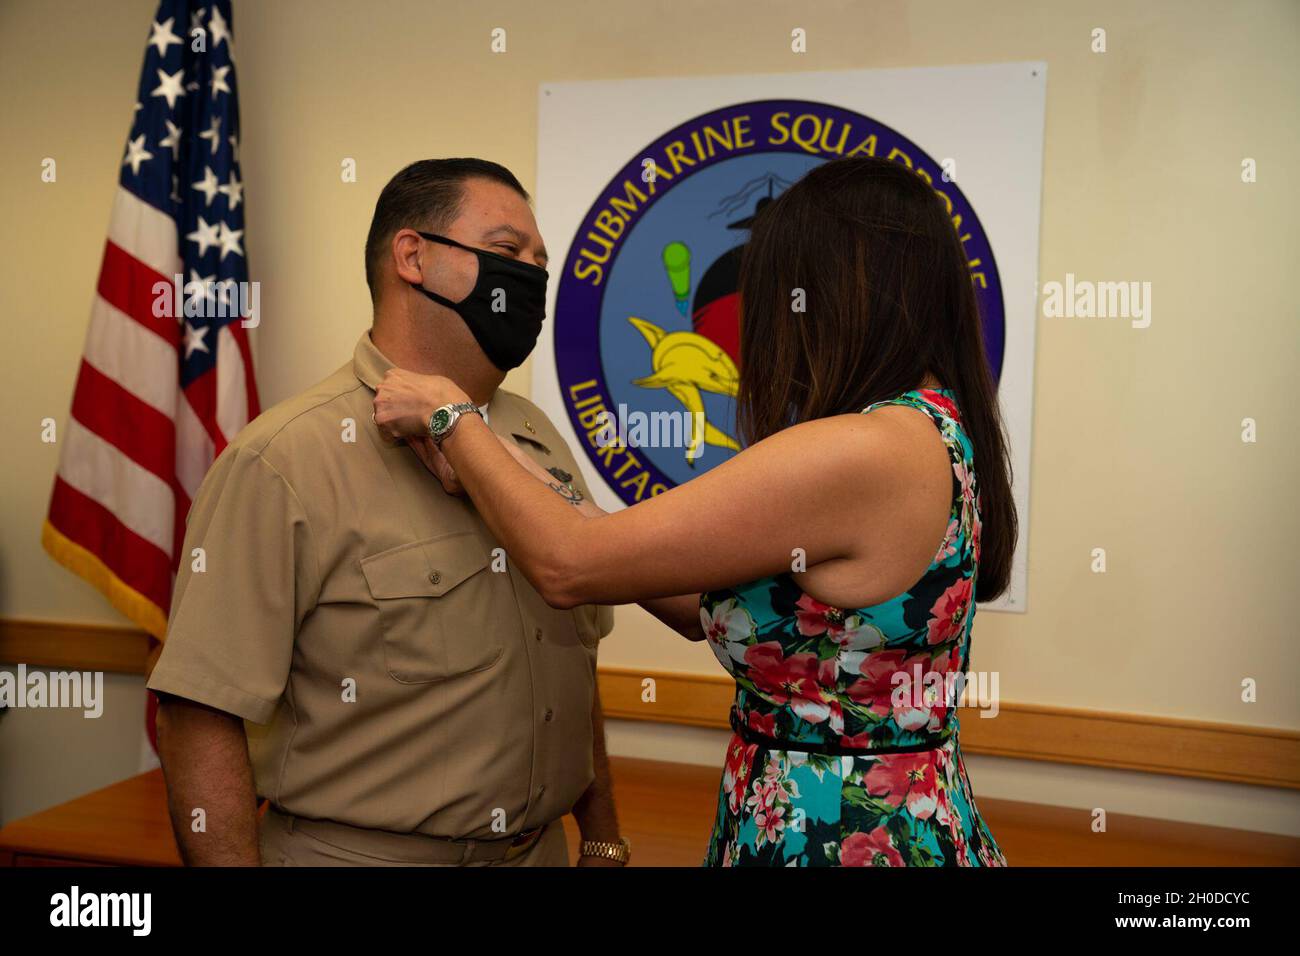 NAVAL BASE GUAM, Guam (Feb. 2, 2021) - Chief Warrant Officer Andrew De La O, from San Antonio, Texas, is pinned by his wife, Valerie, during a promotion ceremony held at Konetzni Hall. Commander, Submarine Squadron 15 is responsible for providing training, material, and personnel readiness support to multiple Los Angeles-class fast-attack submarine commands located at Polaris Point, Naval Base Guam. Stock Photo